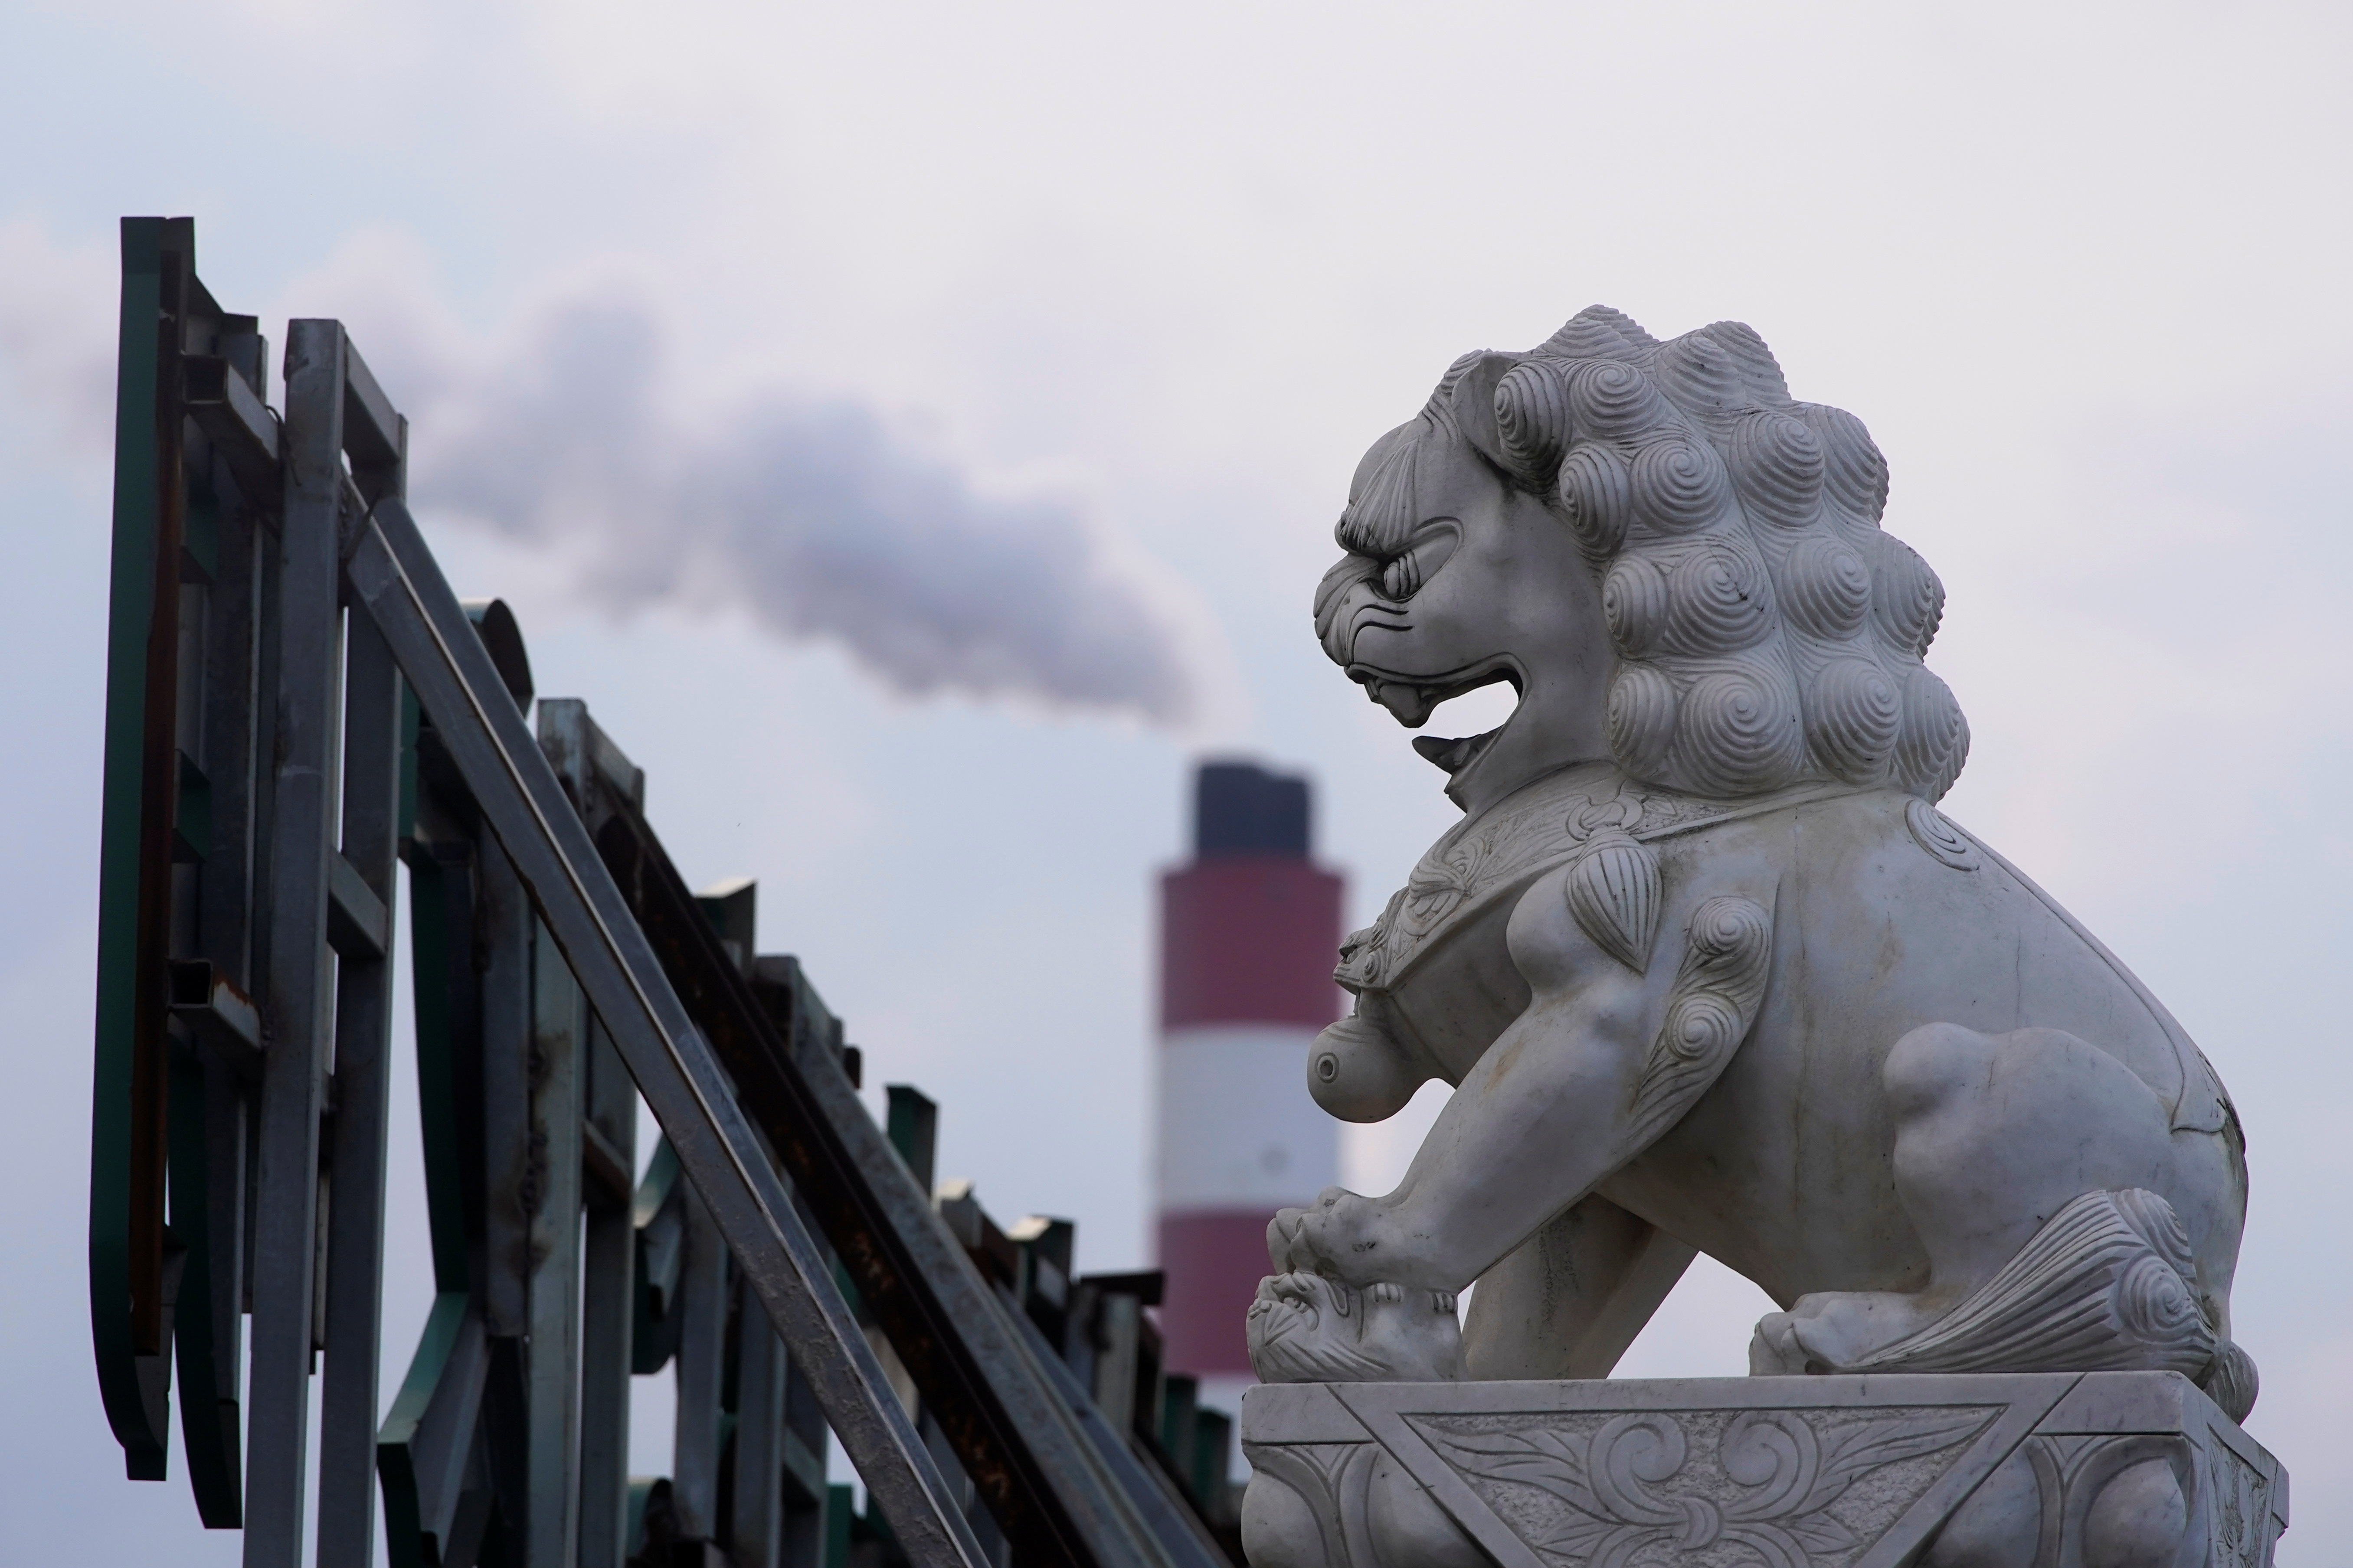 Chimney of a coal-fired power plant stands behind a lion statue in Shanghai